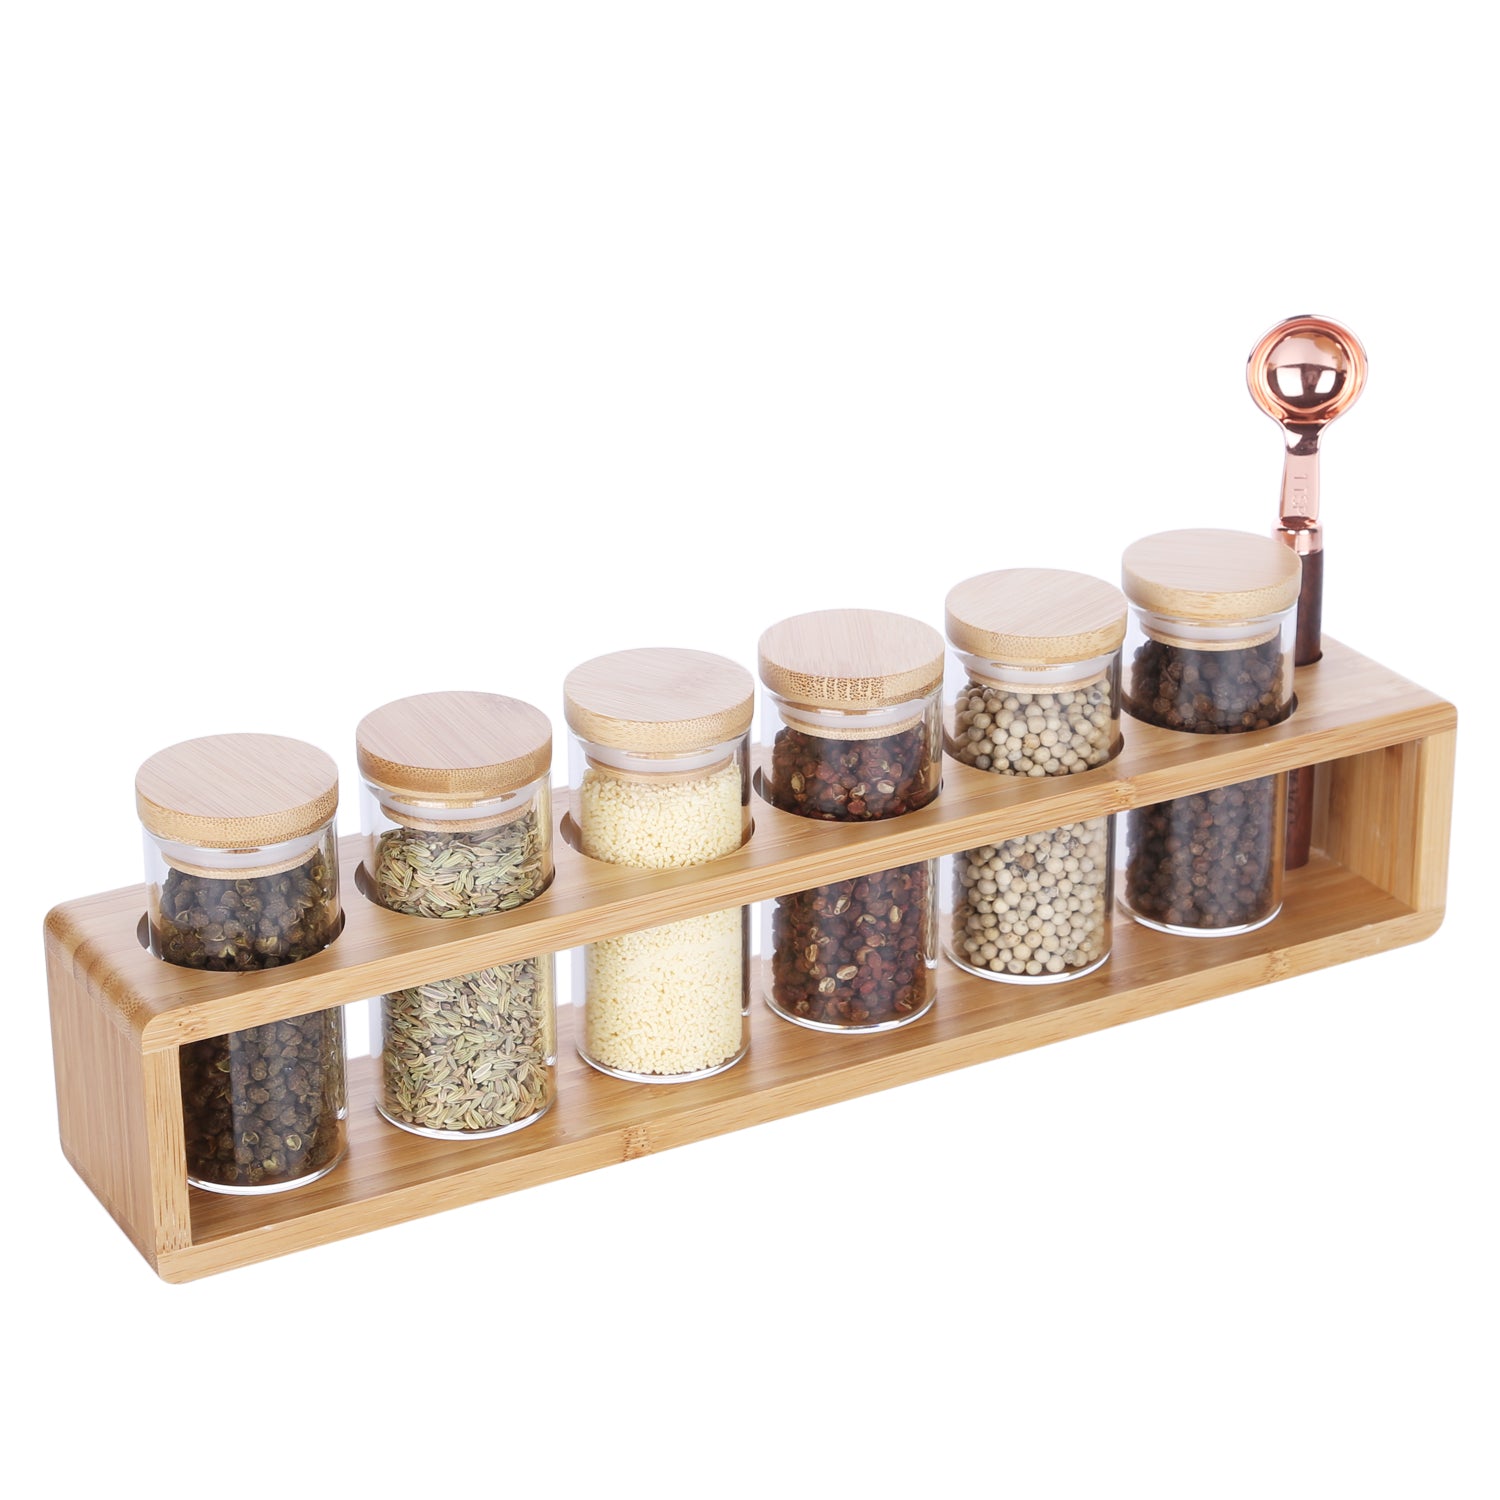 12Pcs Glass Spice Jars With Bamboo Lid, Spice Seasoning Containers, Salt  Pepper Shakers, Spice Organizer, Kitchen Spice Jar Set, Kitchen Accessories